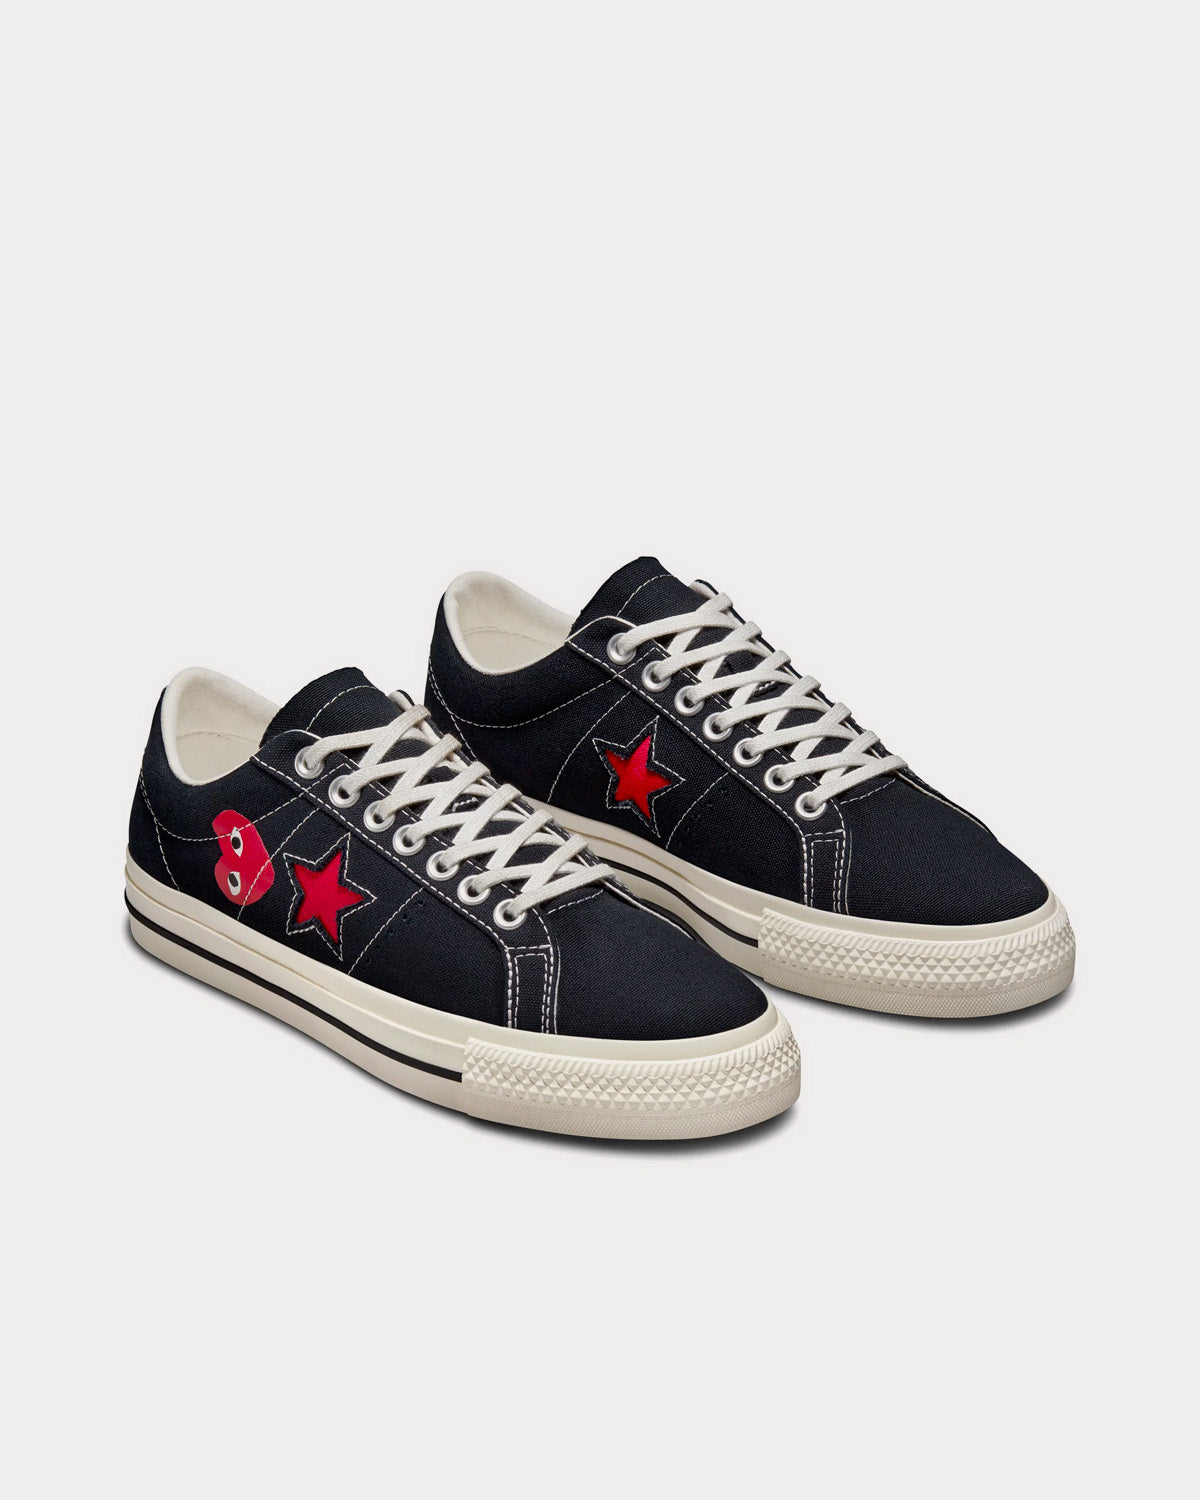 Converse x Comme des Garçons PLAY - One Star Red Heart Black Low Top Sneakers